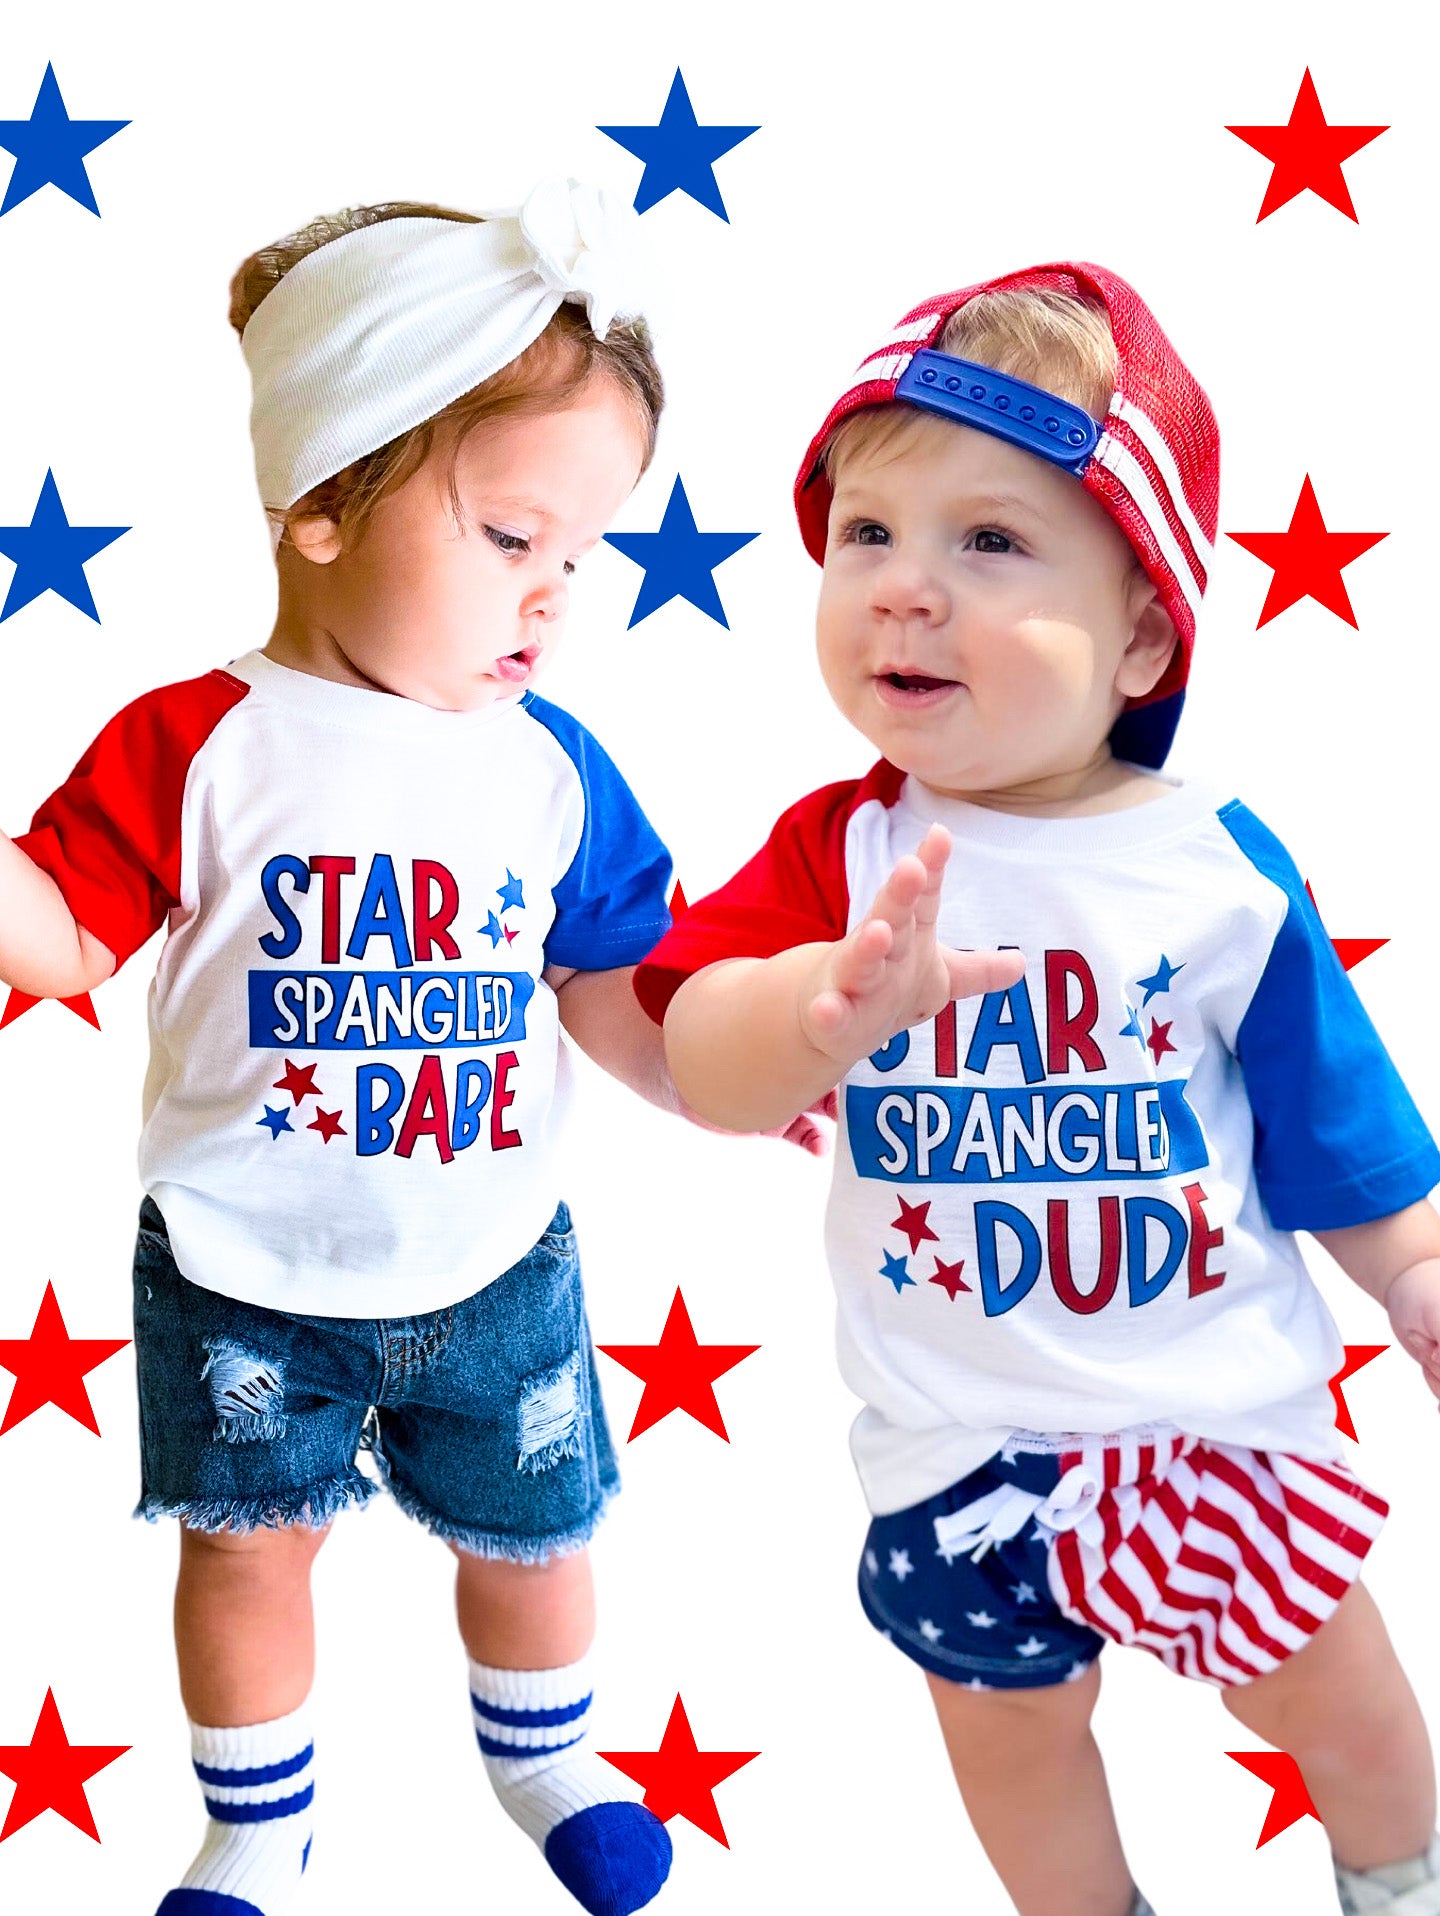 Star Spangled Babe/Dude - (MADE TO ORDER!)